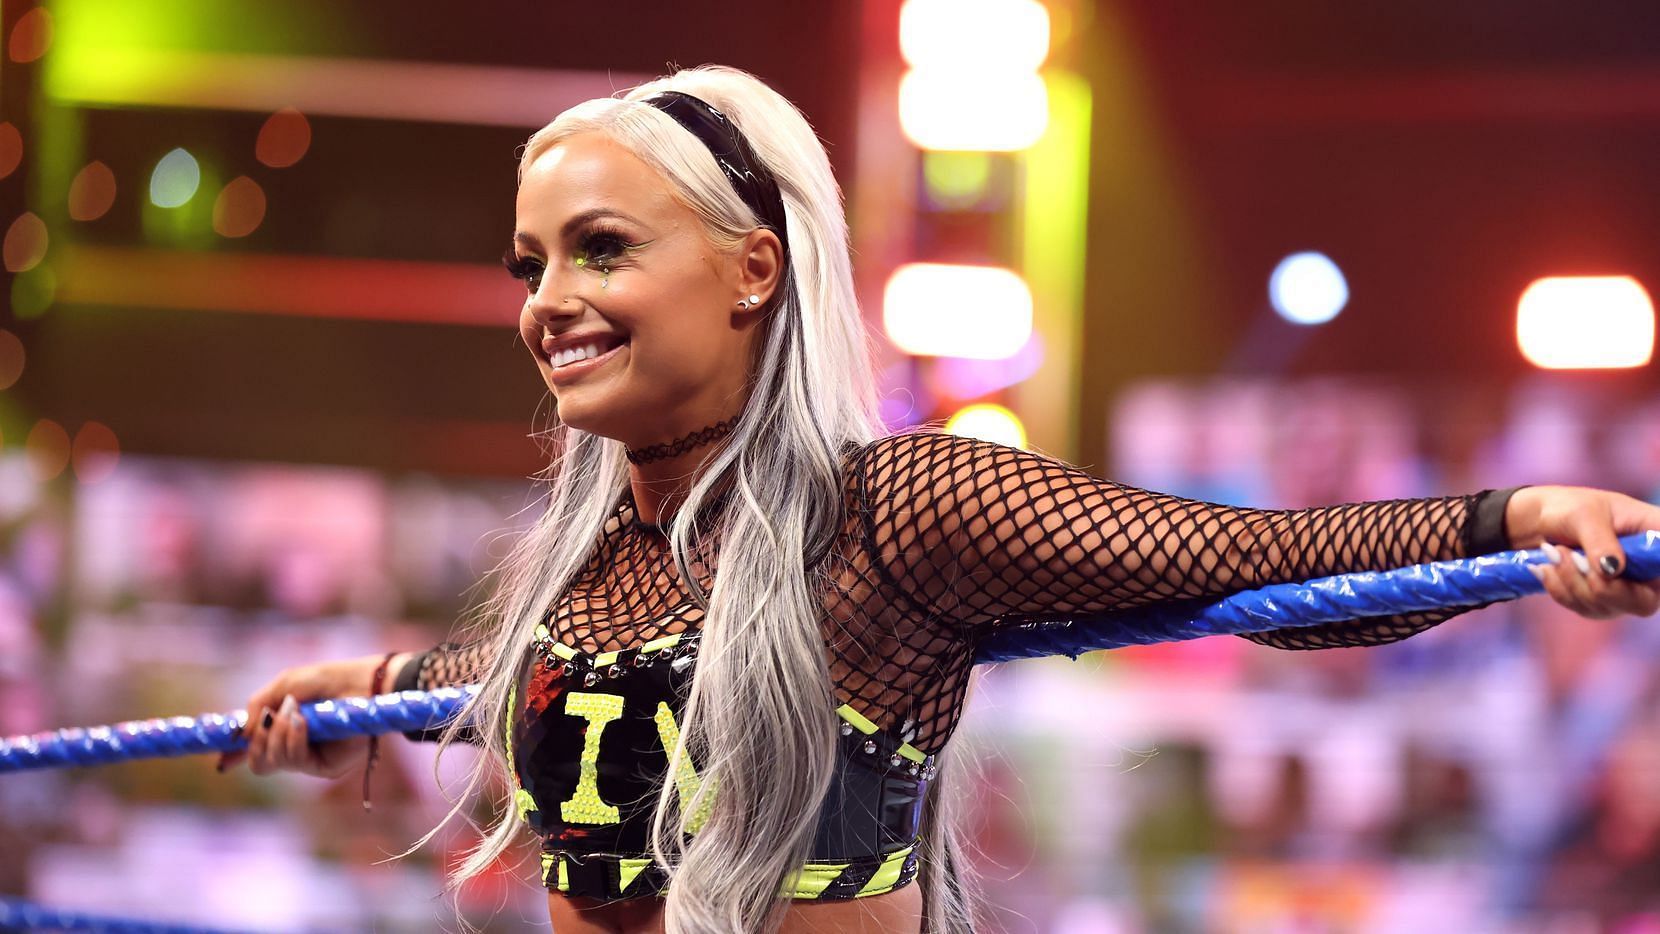 Liv Morgan in action on WWE SmackDown